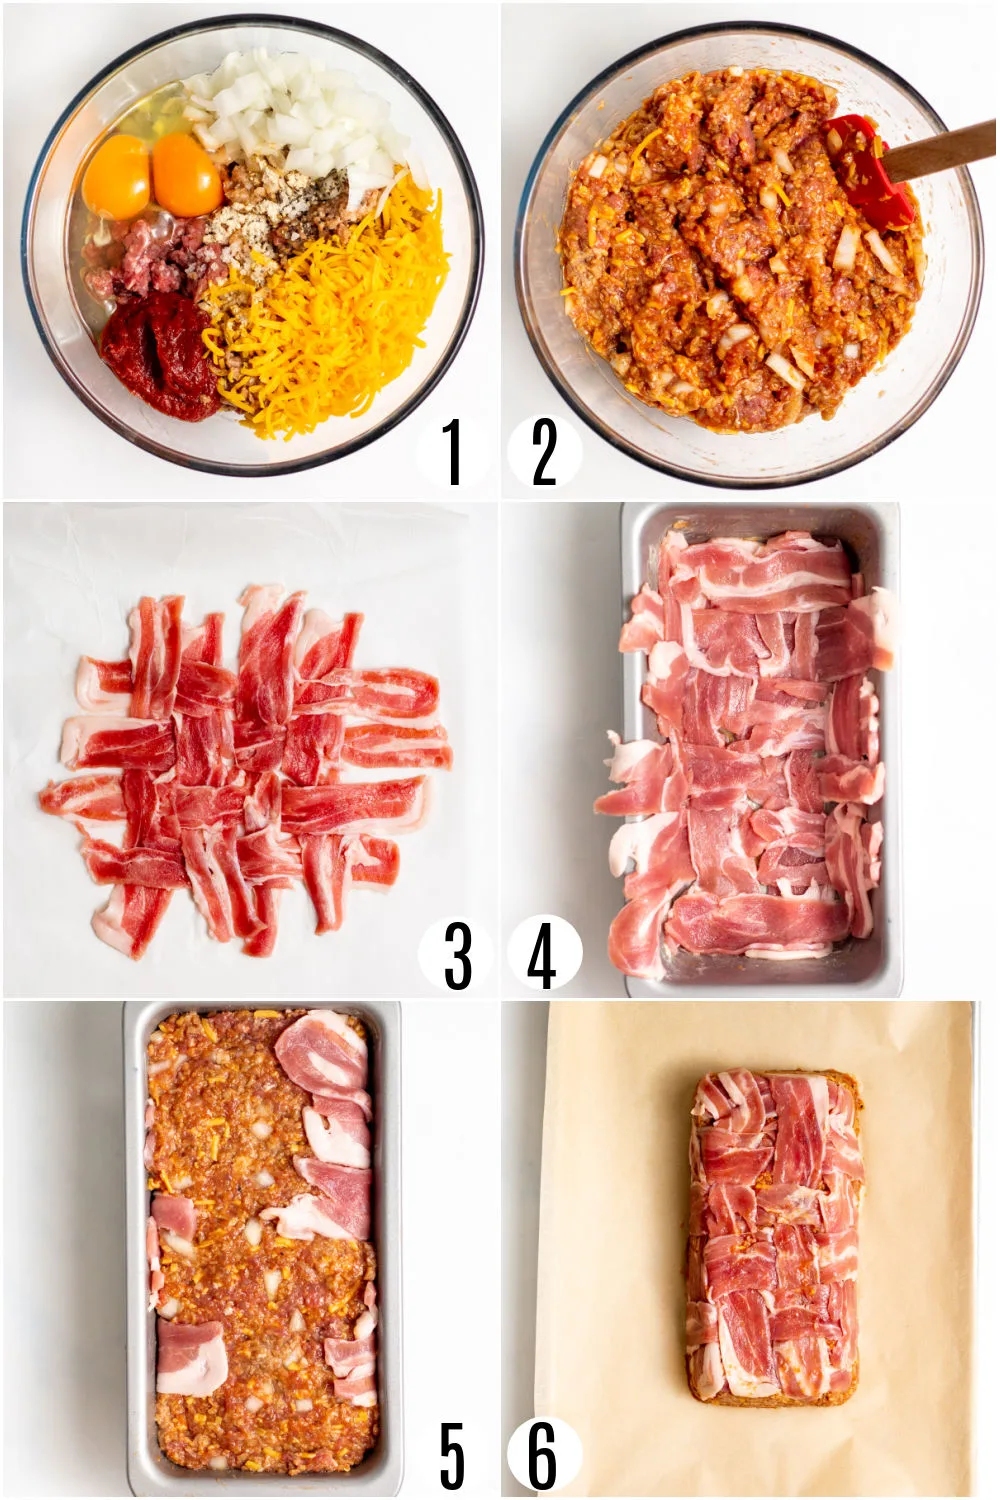 Step by step photos shwoing how to make a bacon weave for meatloaf.